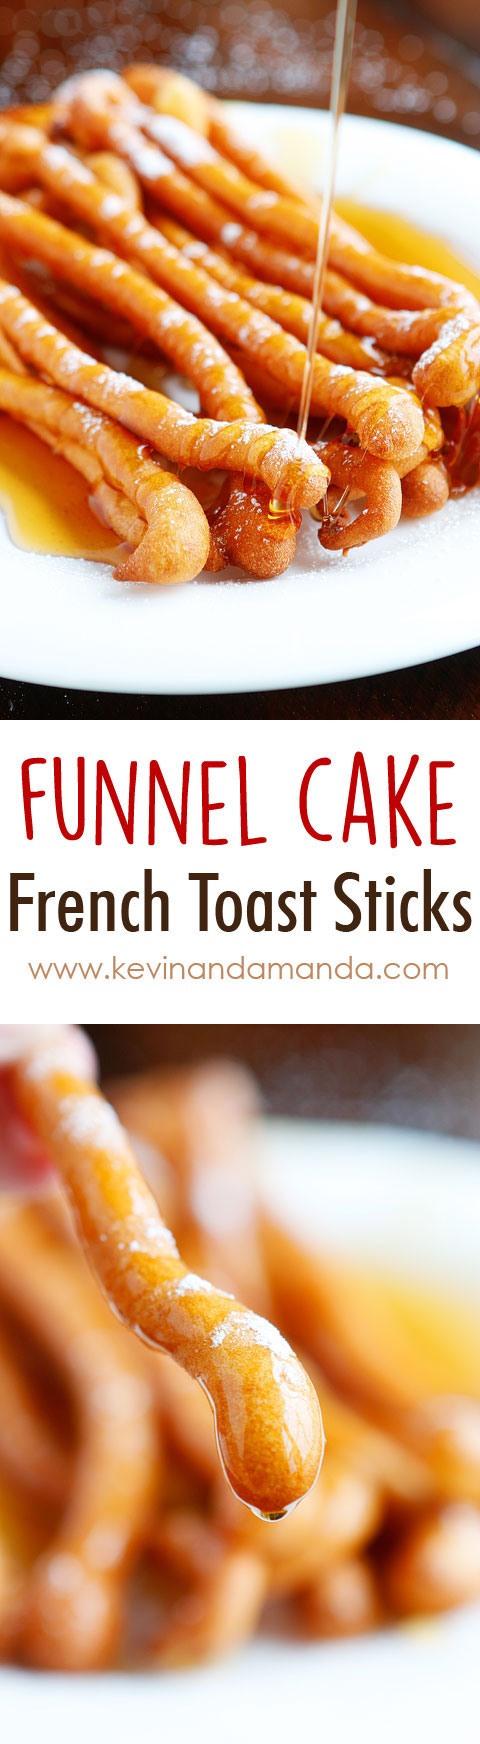 OMG these are Funnel Cake French Toast Sticks! What a fun idea!